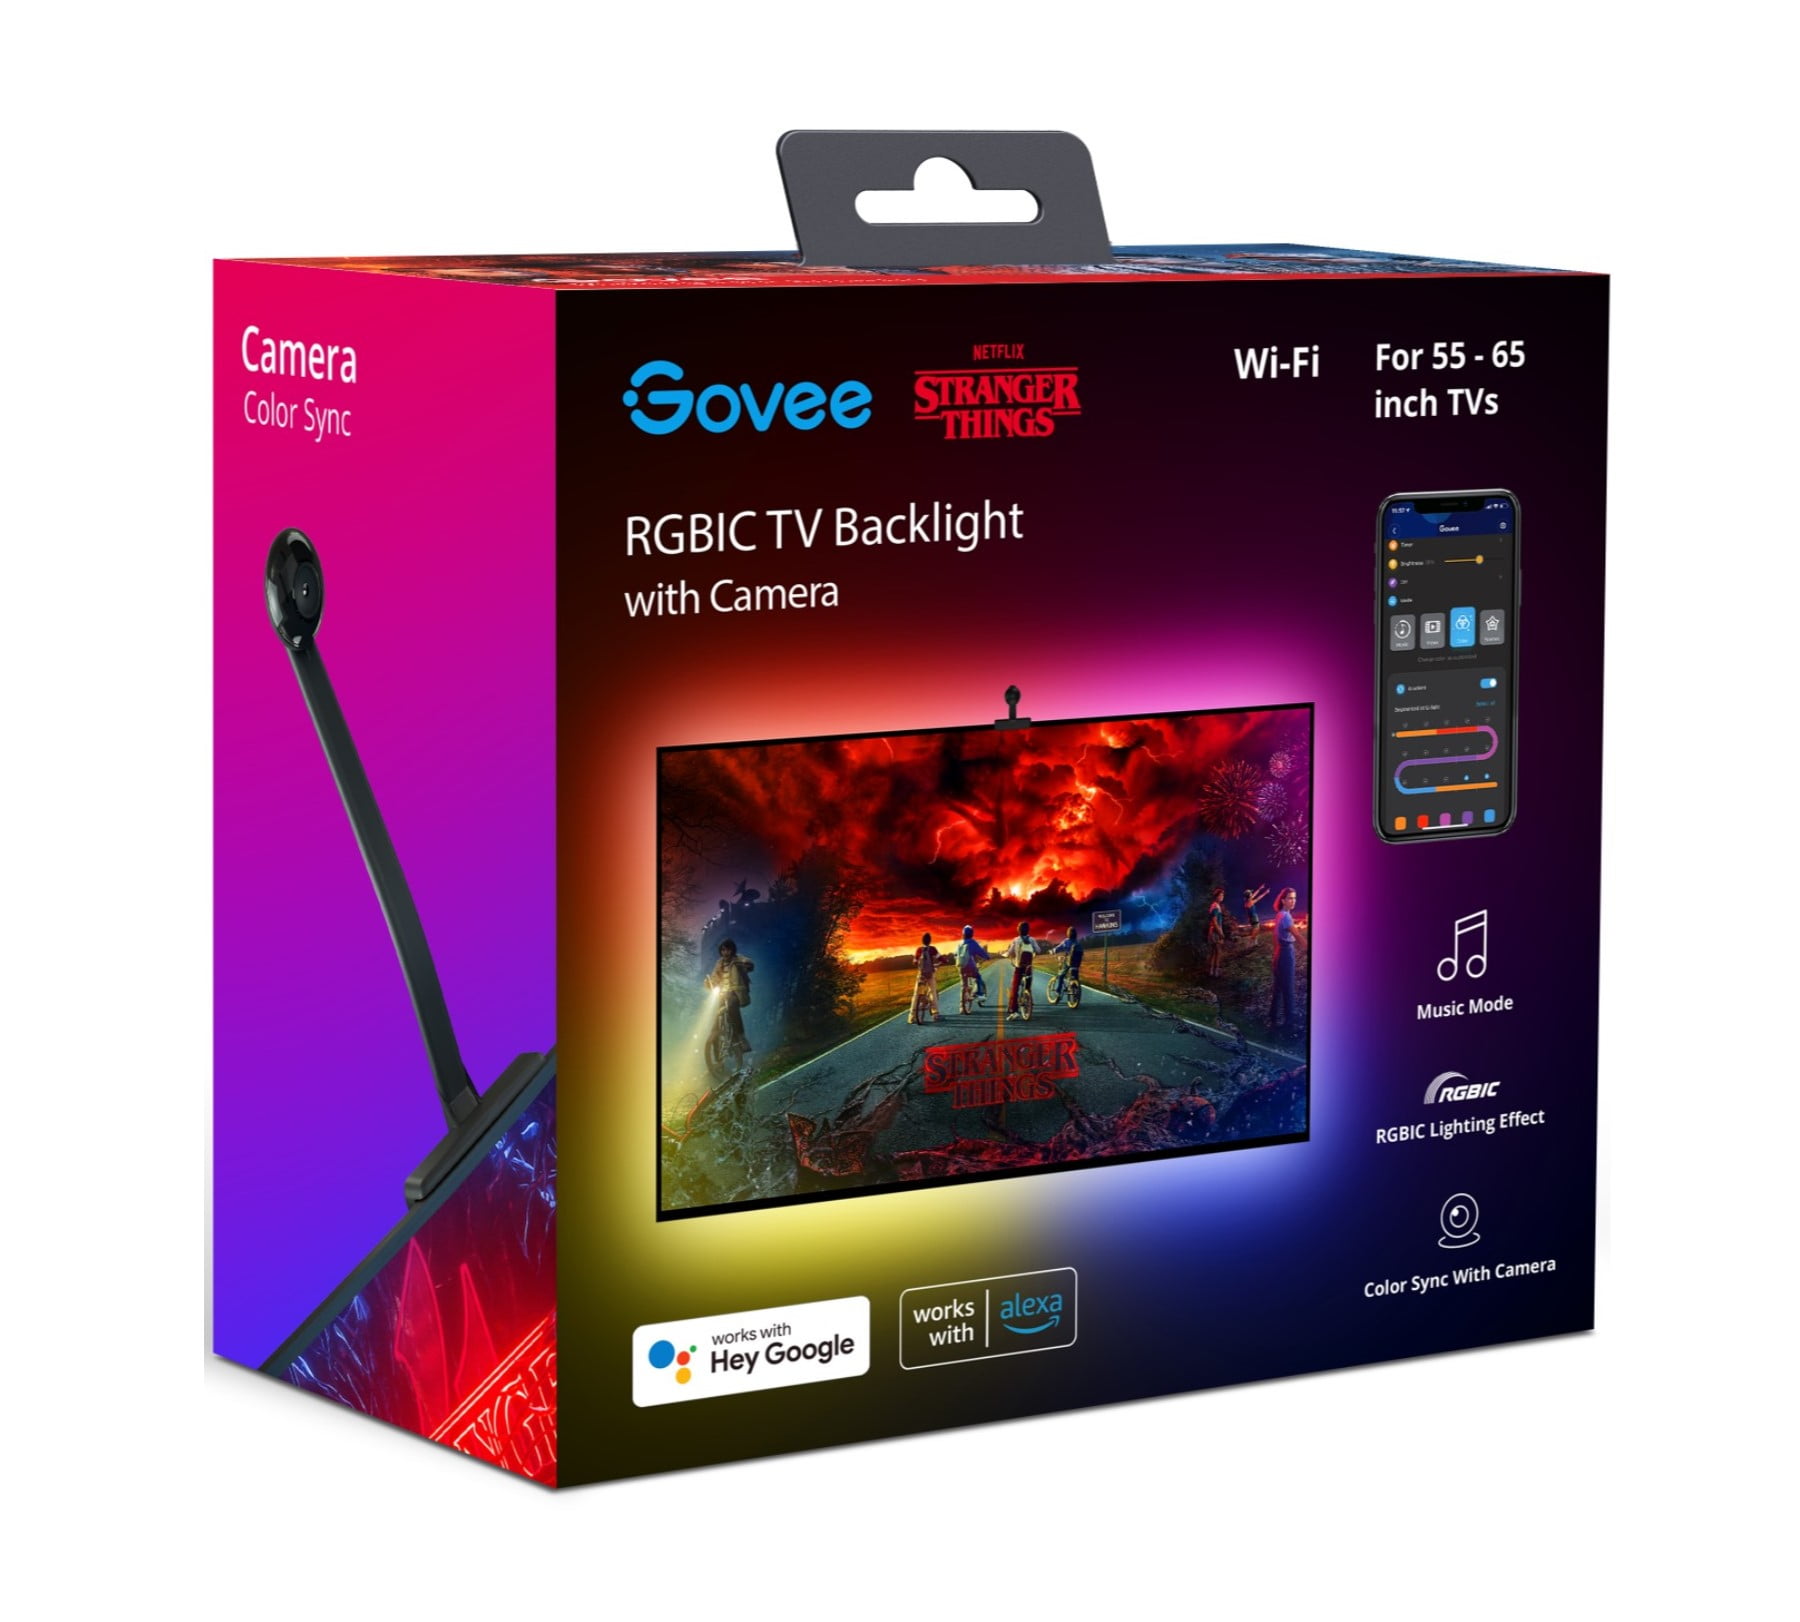 Govee Stranger Things RGBIC TV Backlight with Camera - 12.5 ft